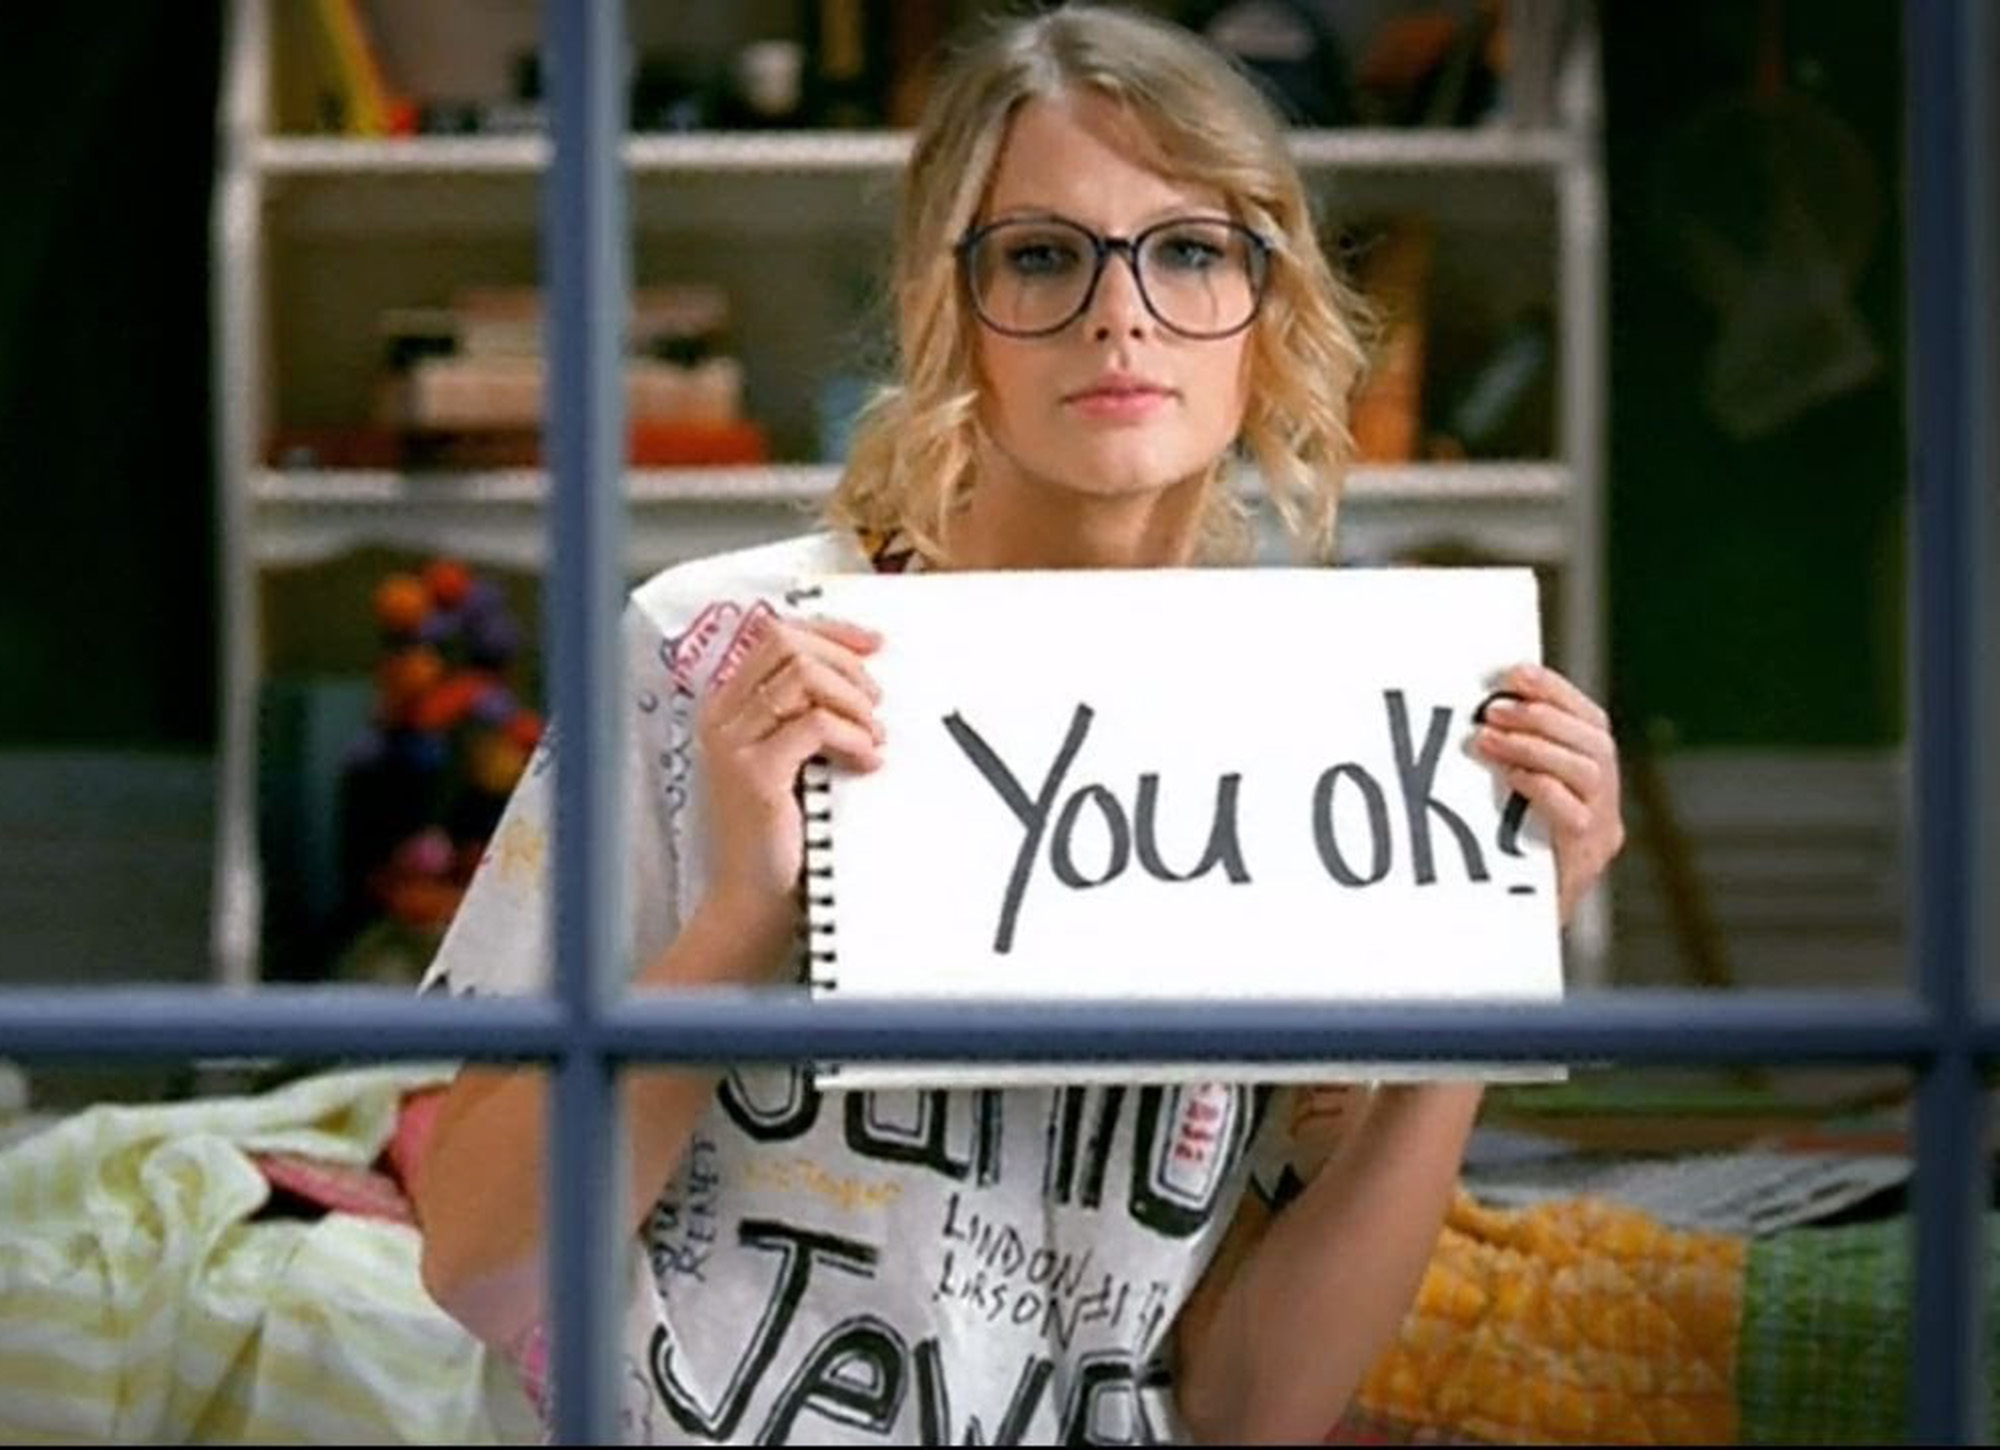 Taylor Swift "You Belong With Me" music video